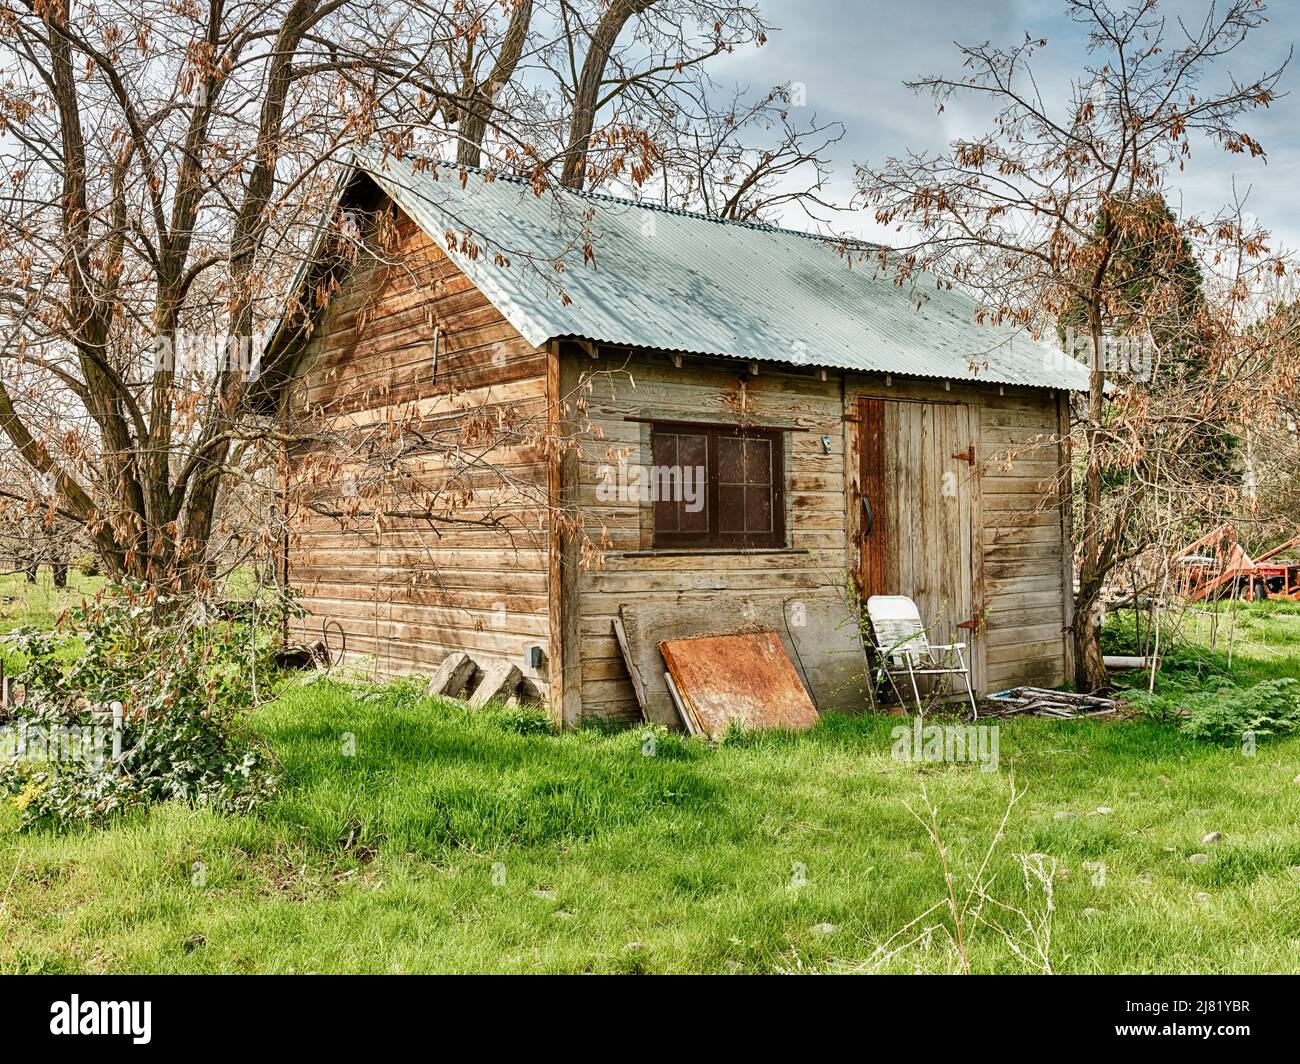 In a rural scene near the Oregon In The Rocks AVA, a white folding chair sits outside a small farm outbuilding. Stock Photo